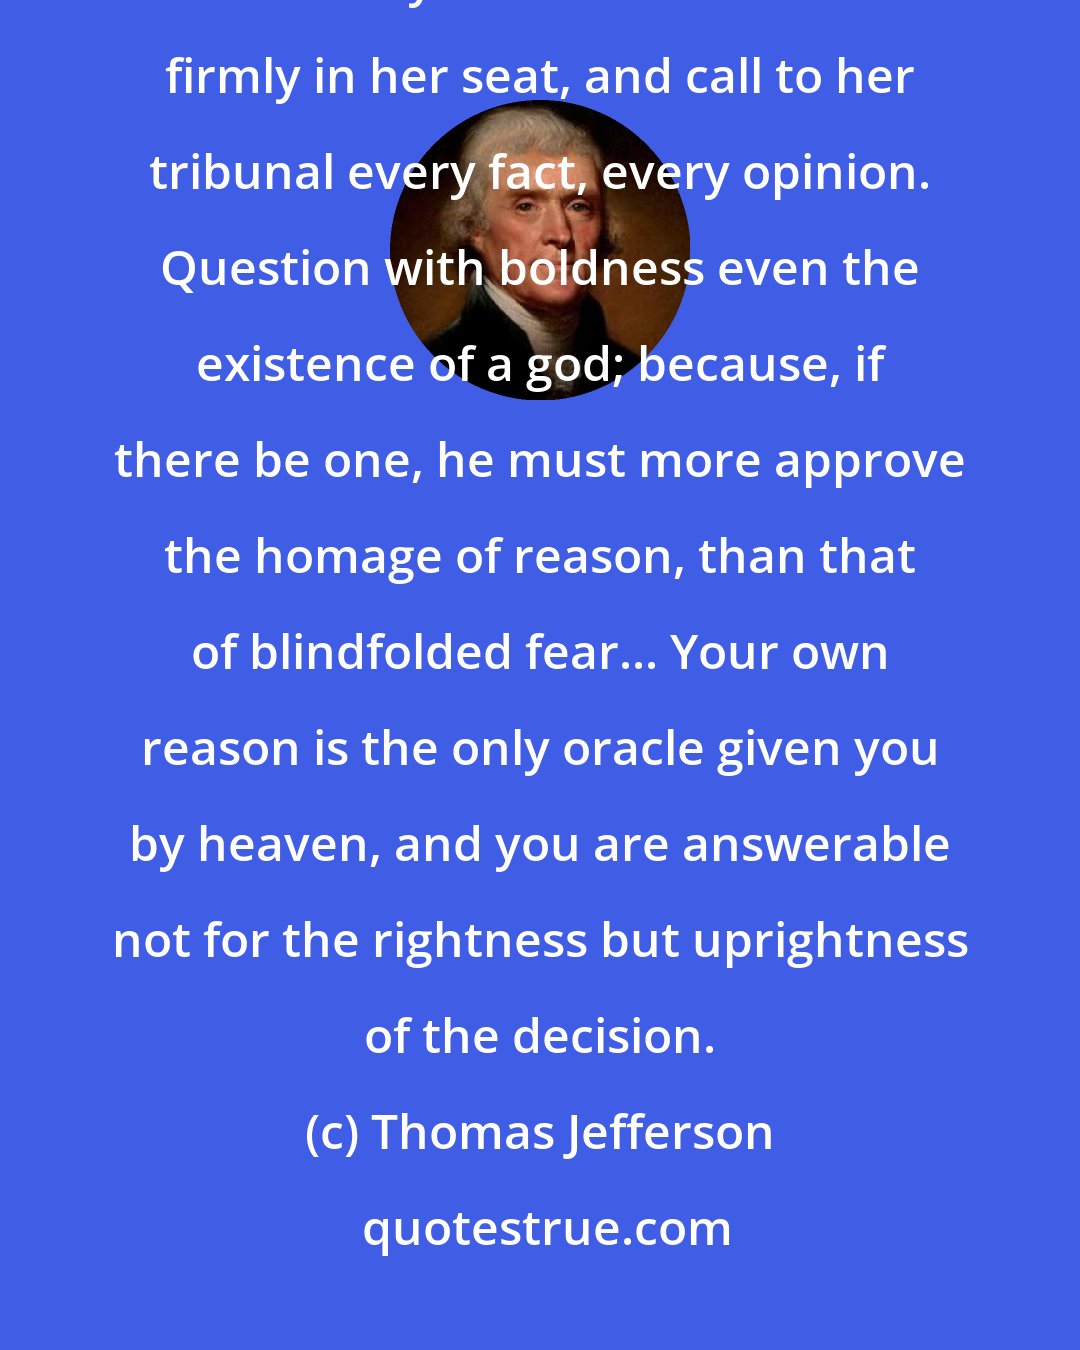 Thomas Jefferson: Shake off all the fears and servile prejudices under which weak minds are servilely crouched. Fix reason firmly in her seat, and call to her tribunal every fact, every opinion. Question with boldness even the existence of a god; because, if there be one, he must more approve the homage of reason, than that of blindfolded fear... Your own reason is the only oracle given you by heaven, and you are answerable not for the rightness but uprightness of the decision.